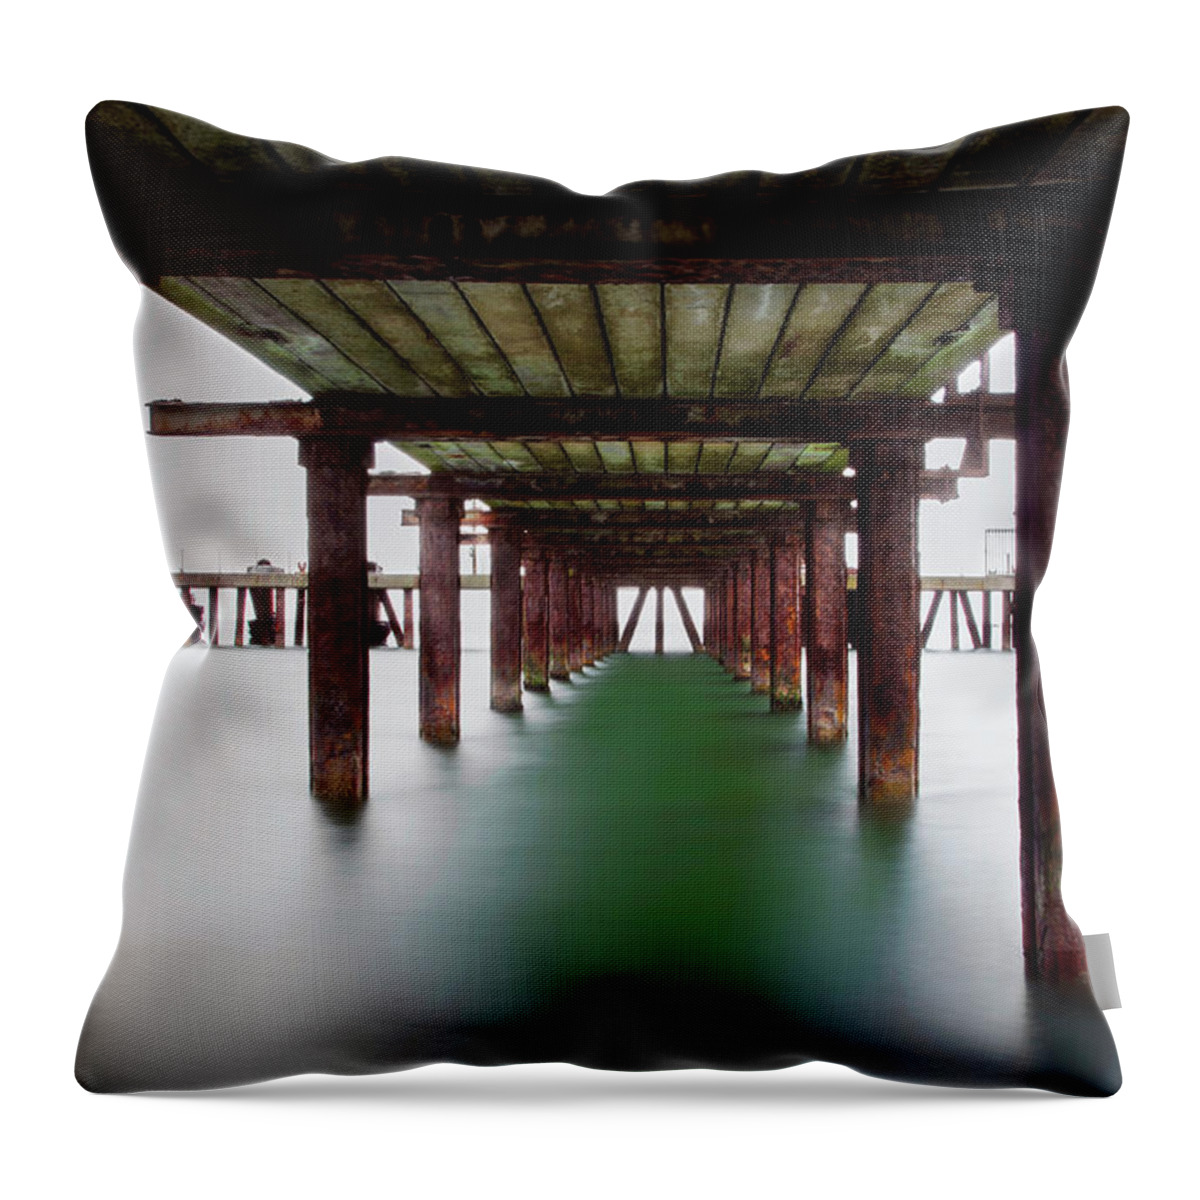 Underpass Throw Pillow featuring the photograph Old Bridge by Photography By Lana Galina